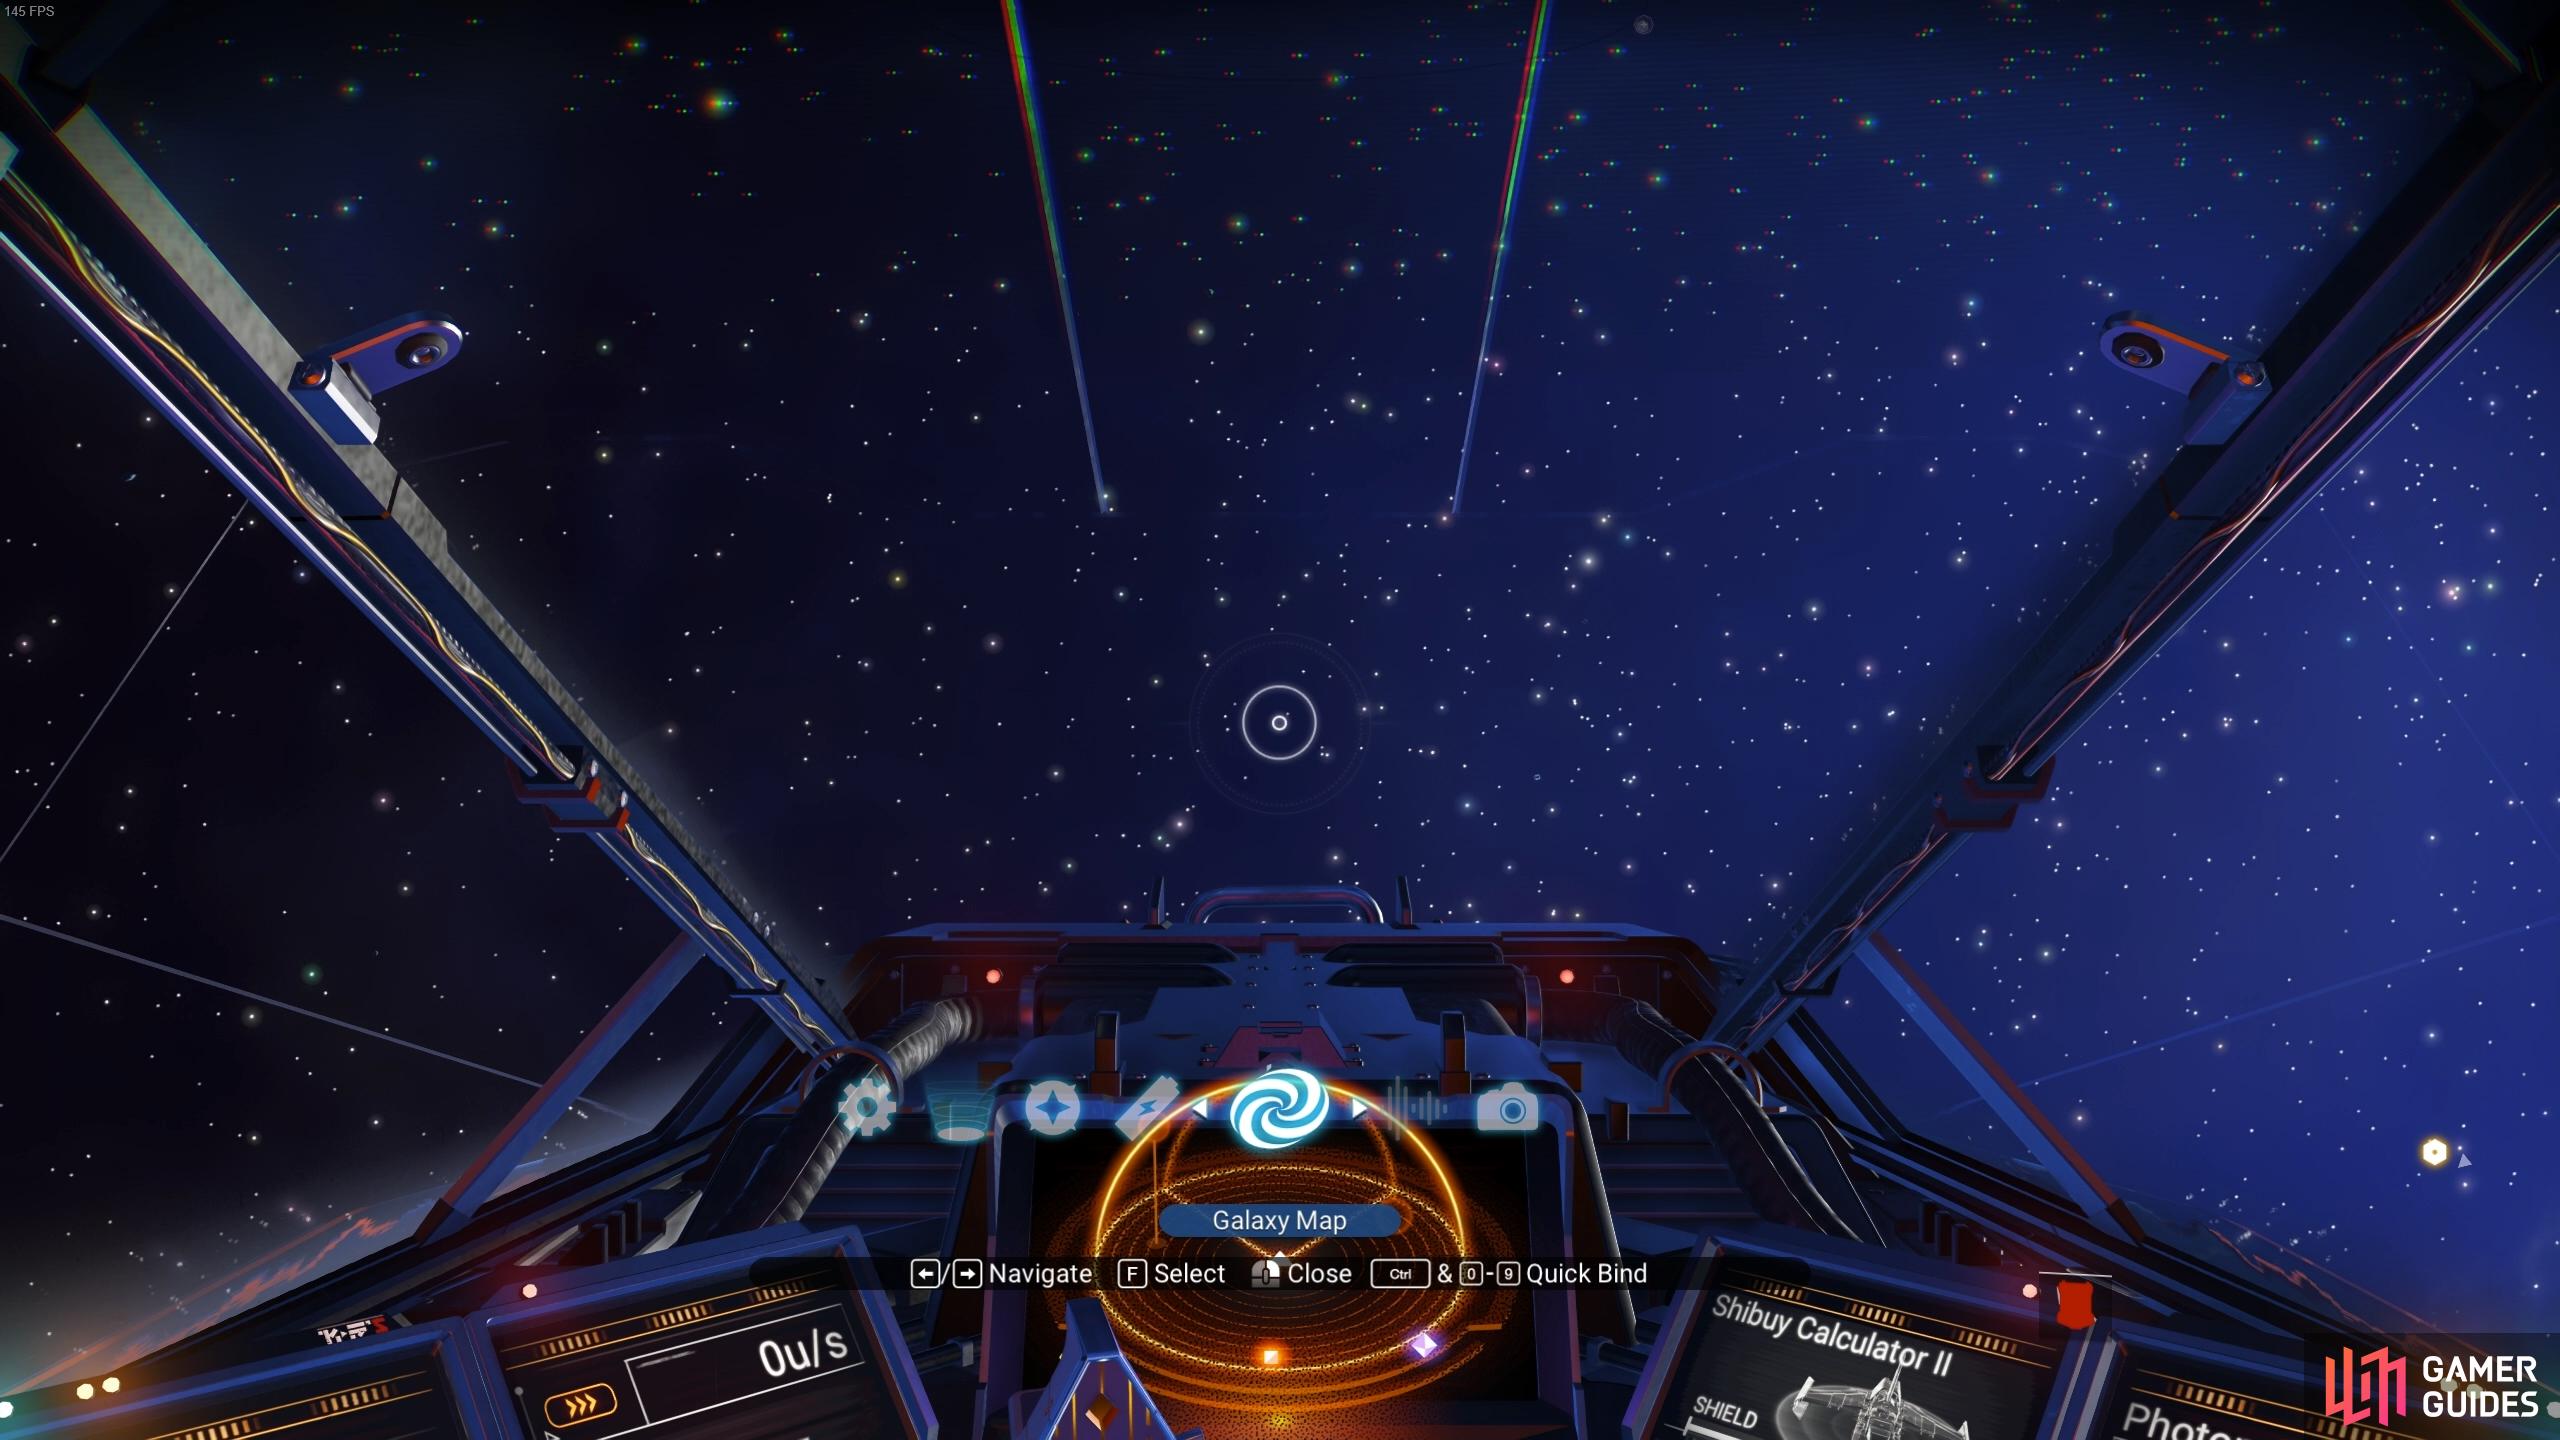 The Galaxy Map can be accessed from the quick menu.